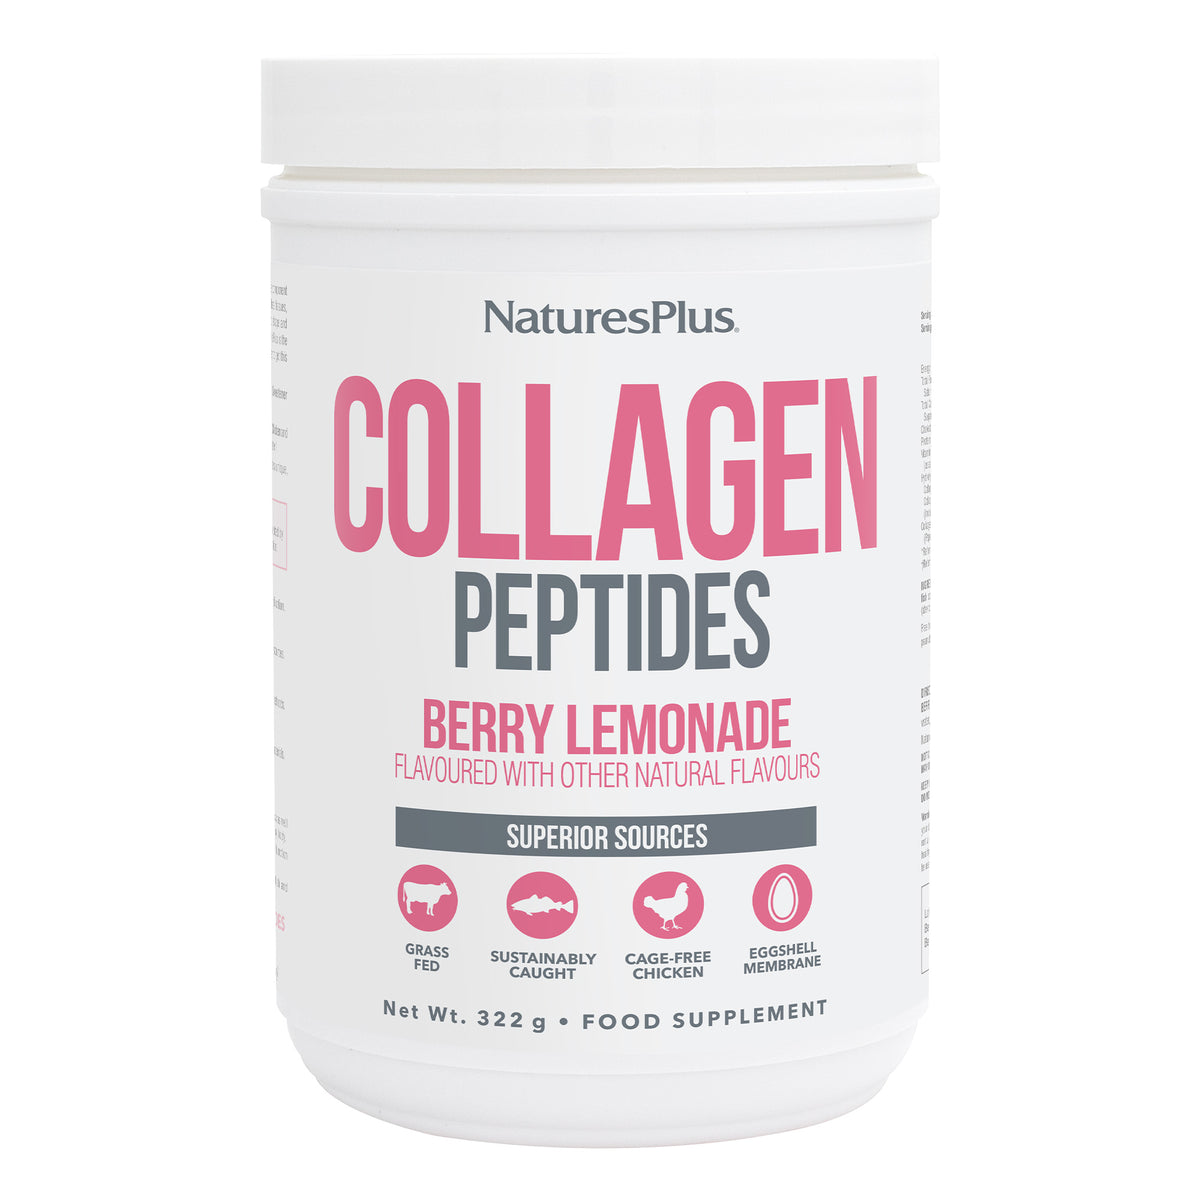 product image of Collagen Peptides Berry Lemonade containing Collagen Peptides Berry Lemonade